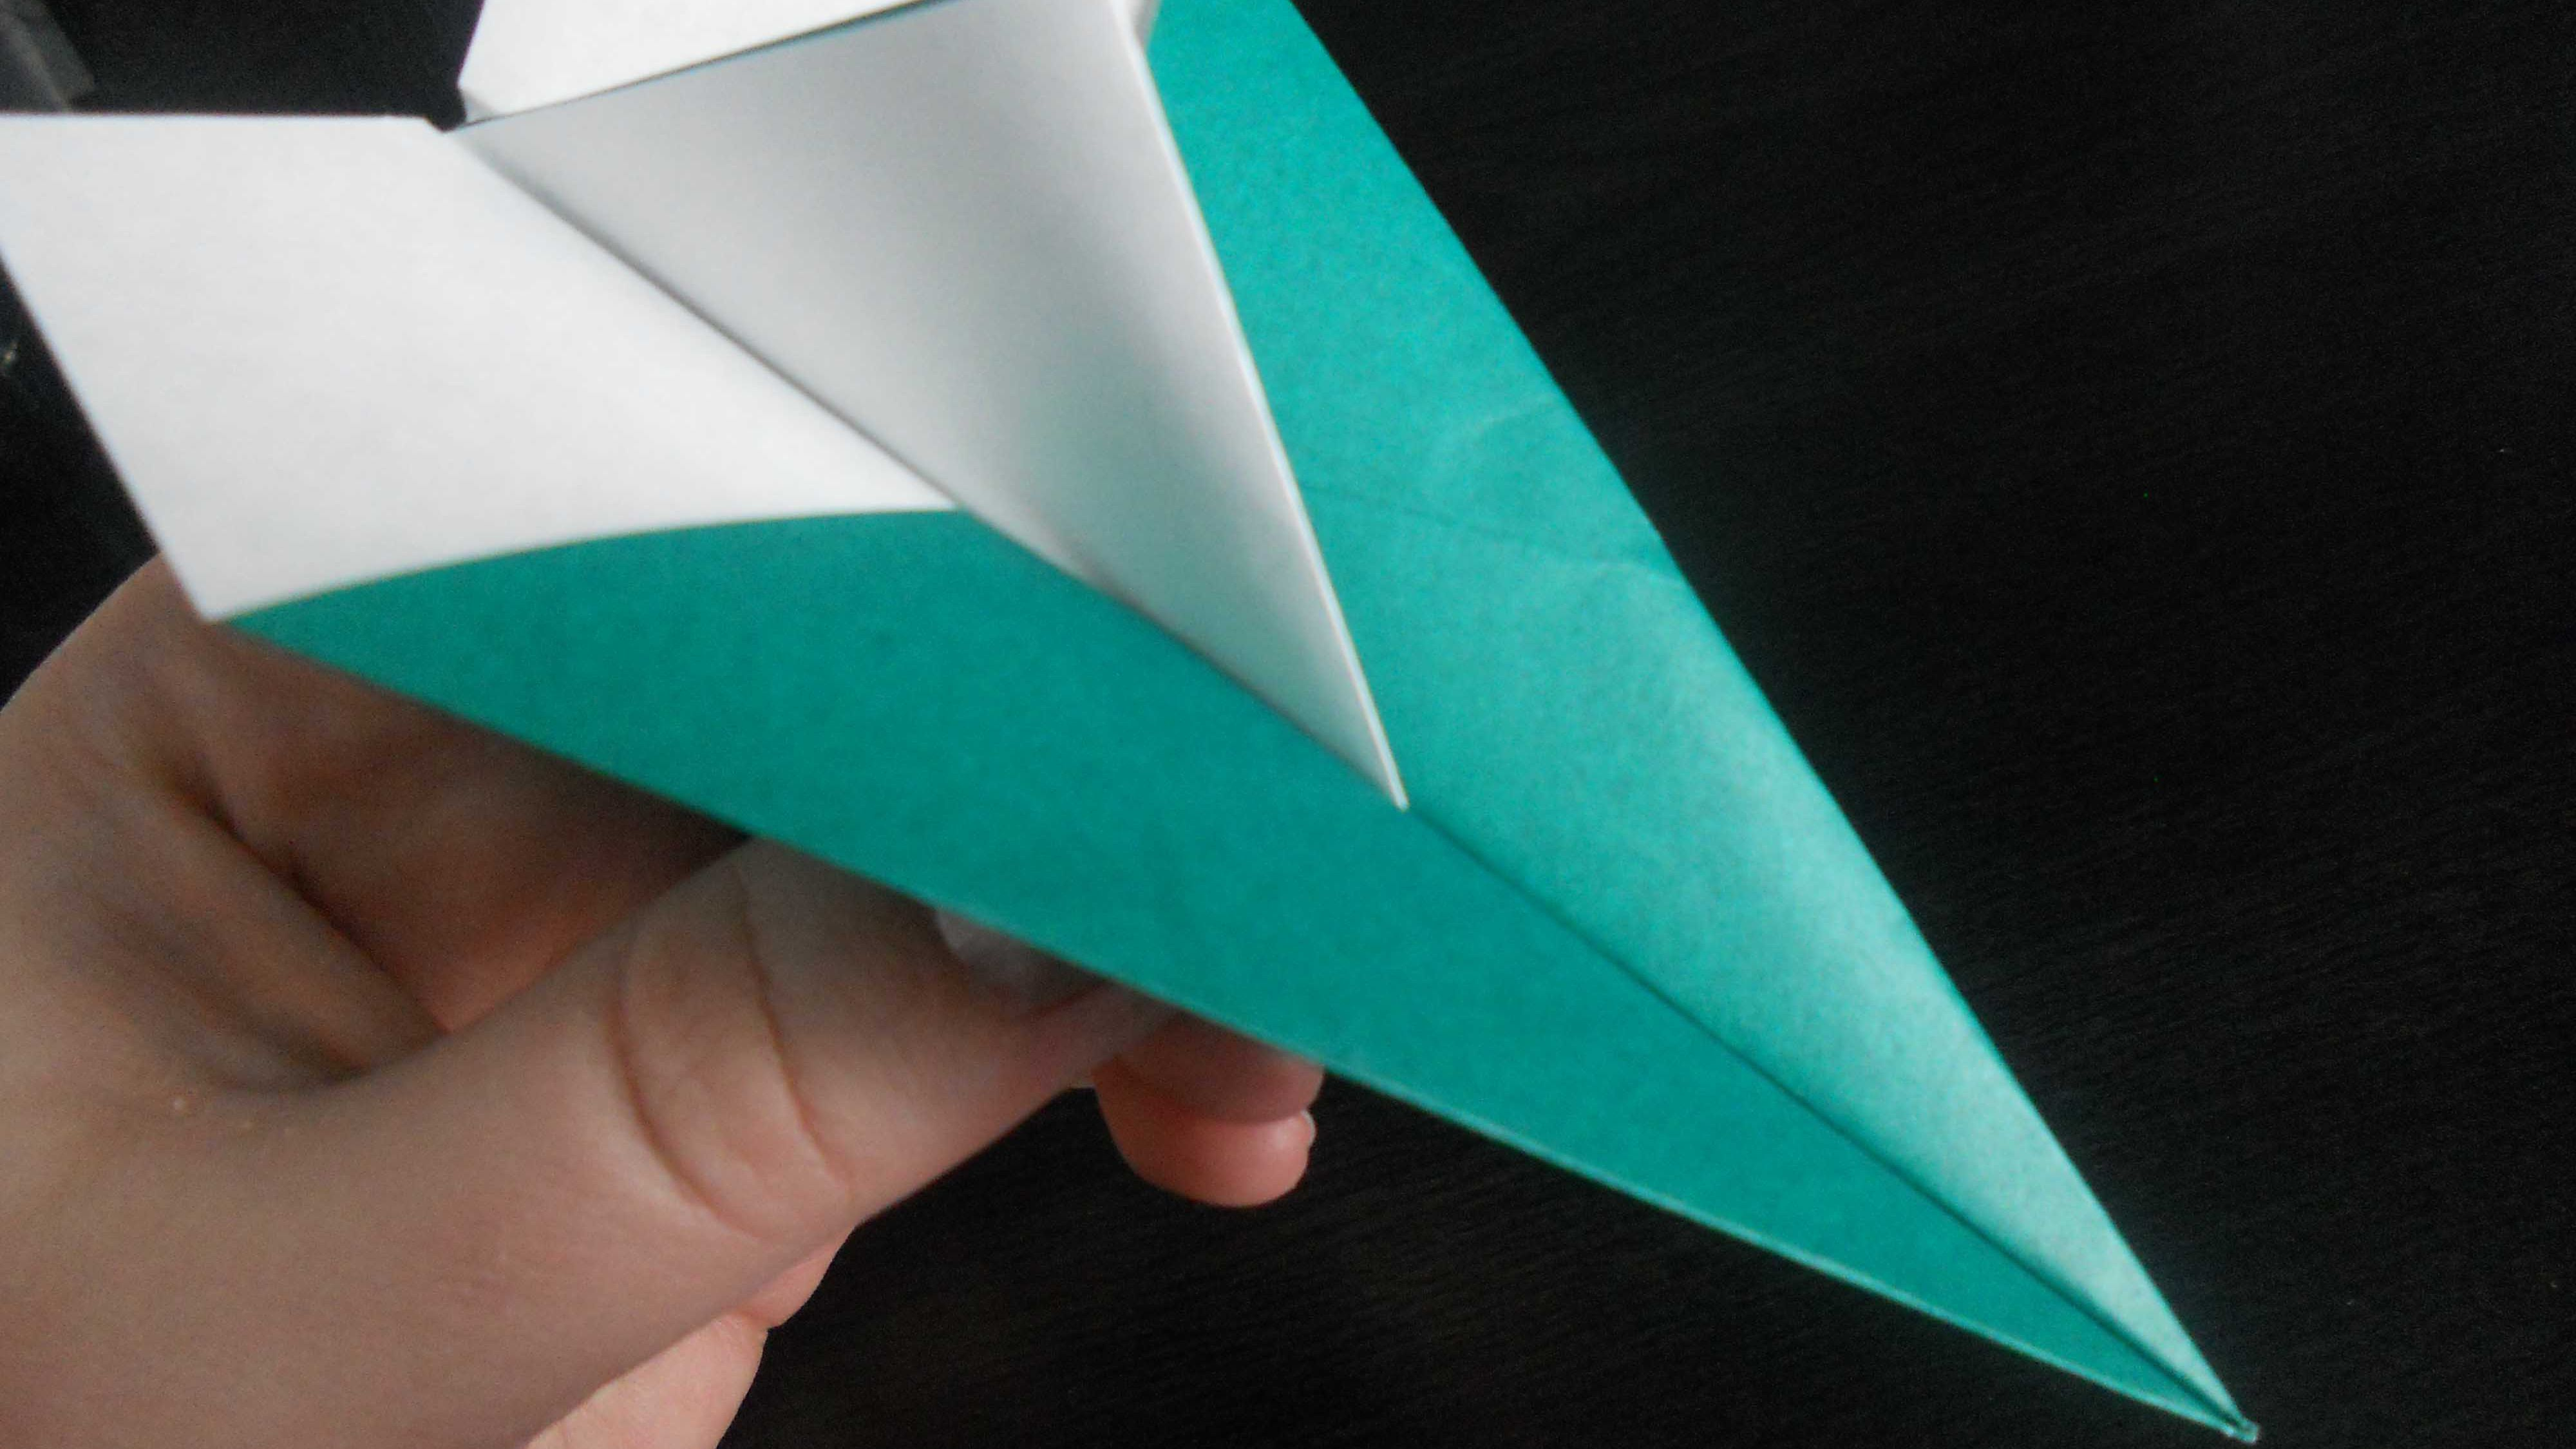 How To Make An Origami Plane Making A Simple Paper Airplane